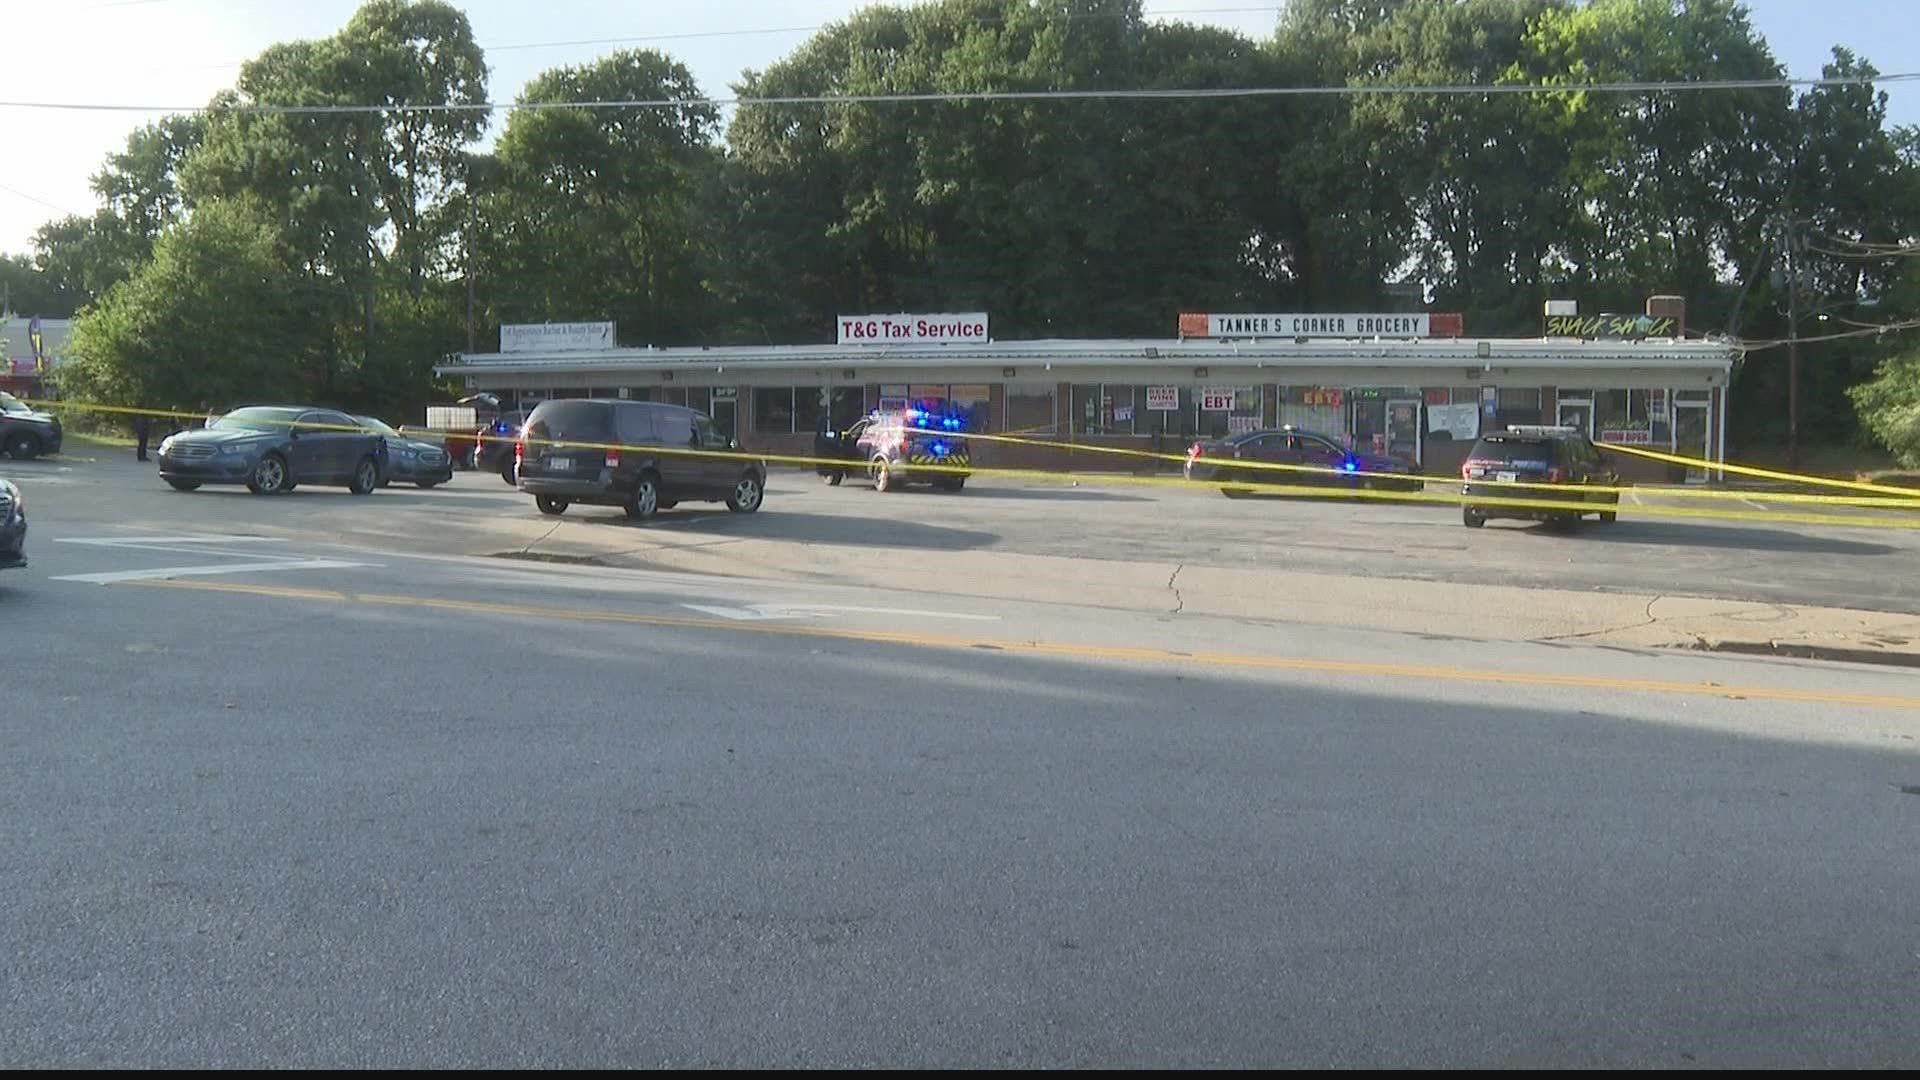 Investigators determined that the shooting took place along McDonough Boulevard near Tanner's Corner Grocery, The Original Snack Shack and several other businesses.